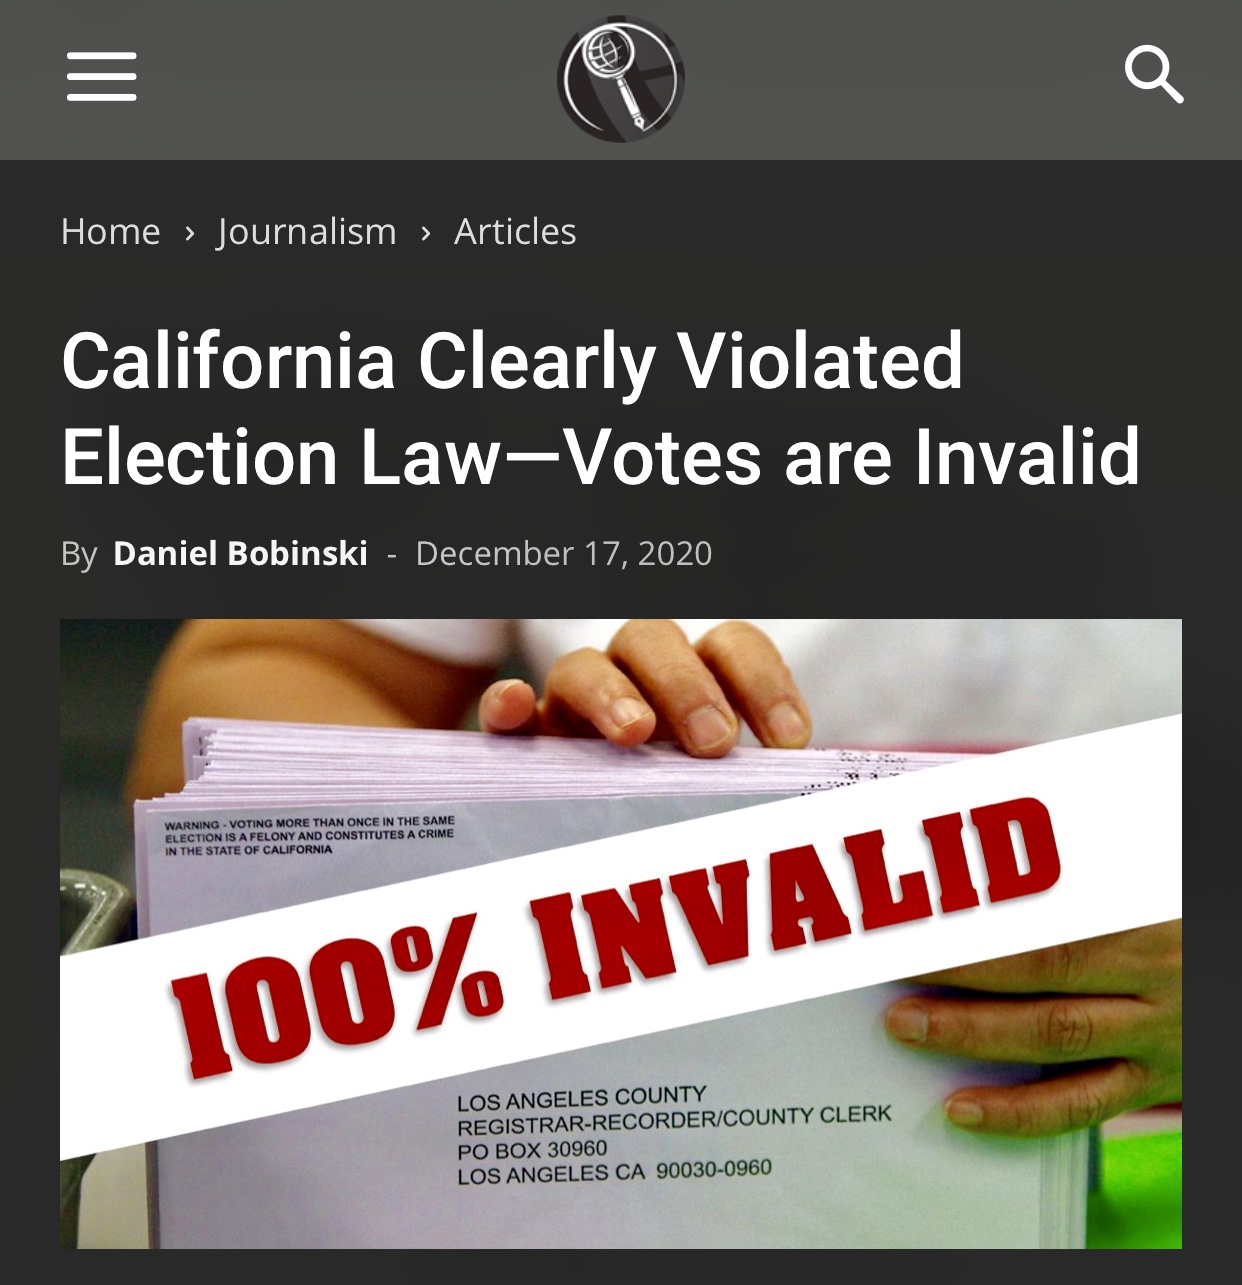 Big Breaking News California Clearly Violated Election Law Votes are Invalid